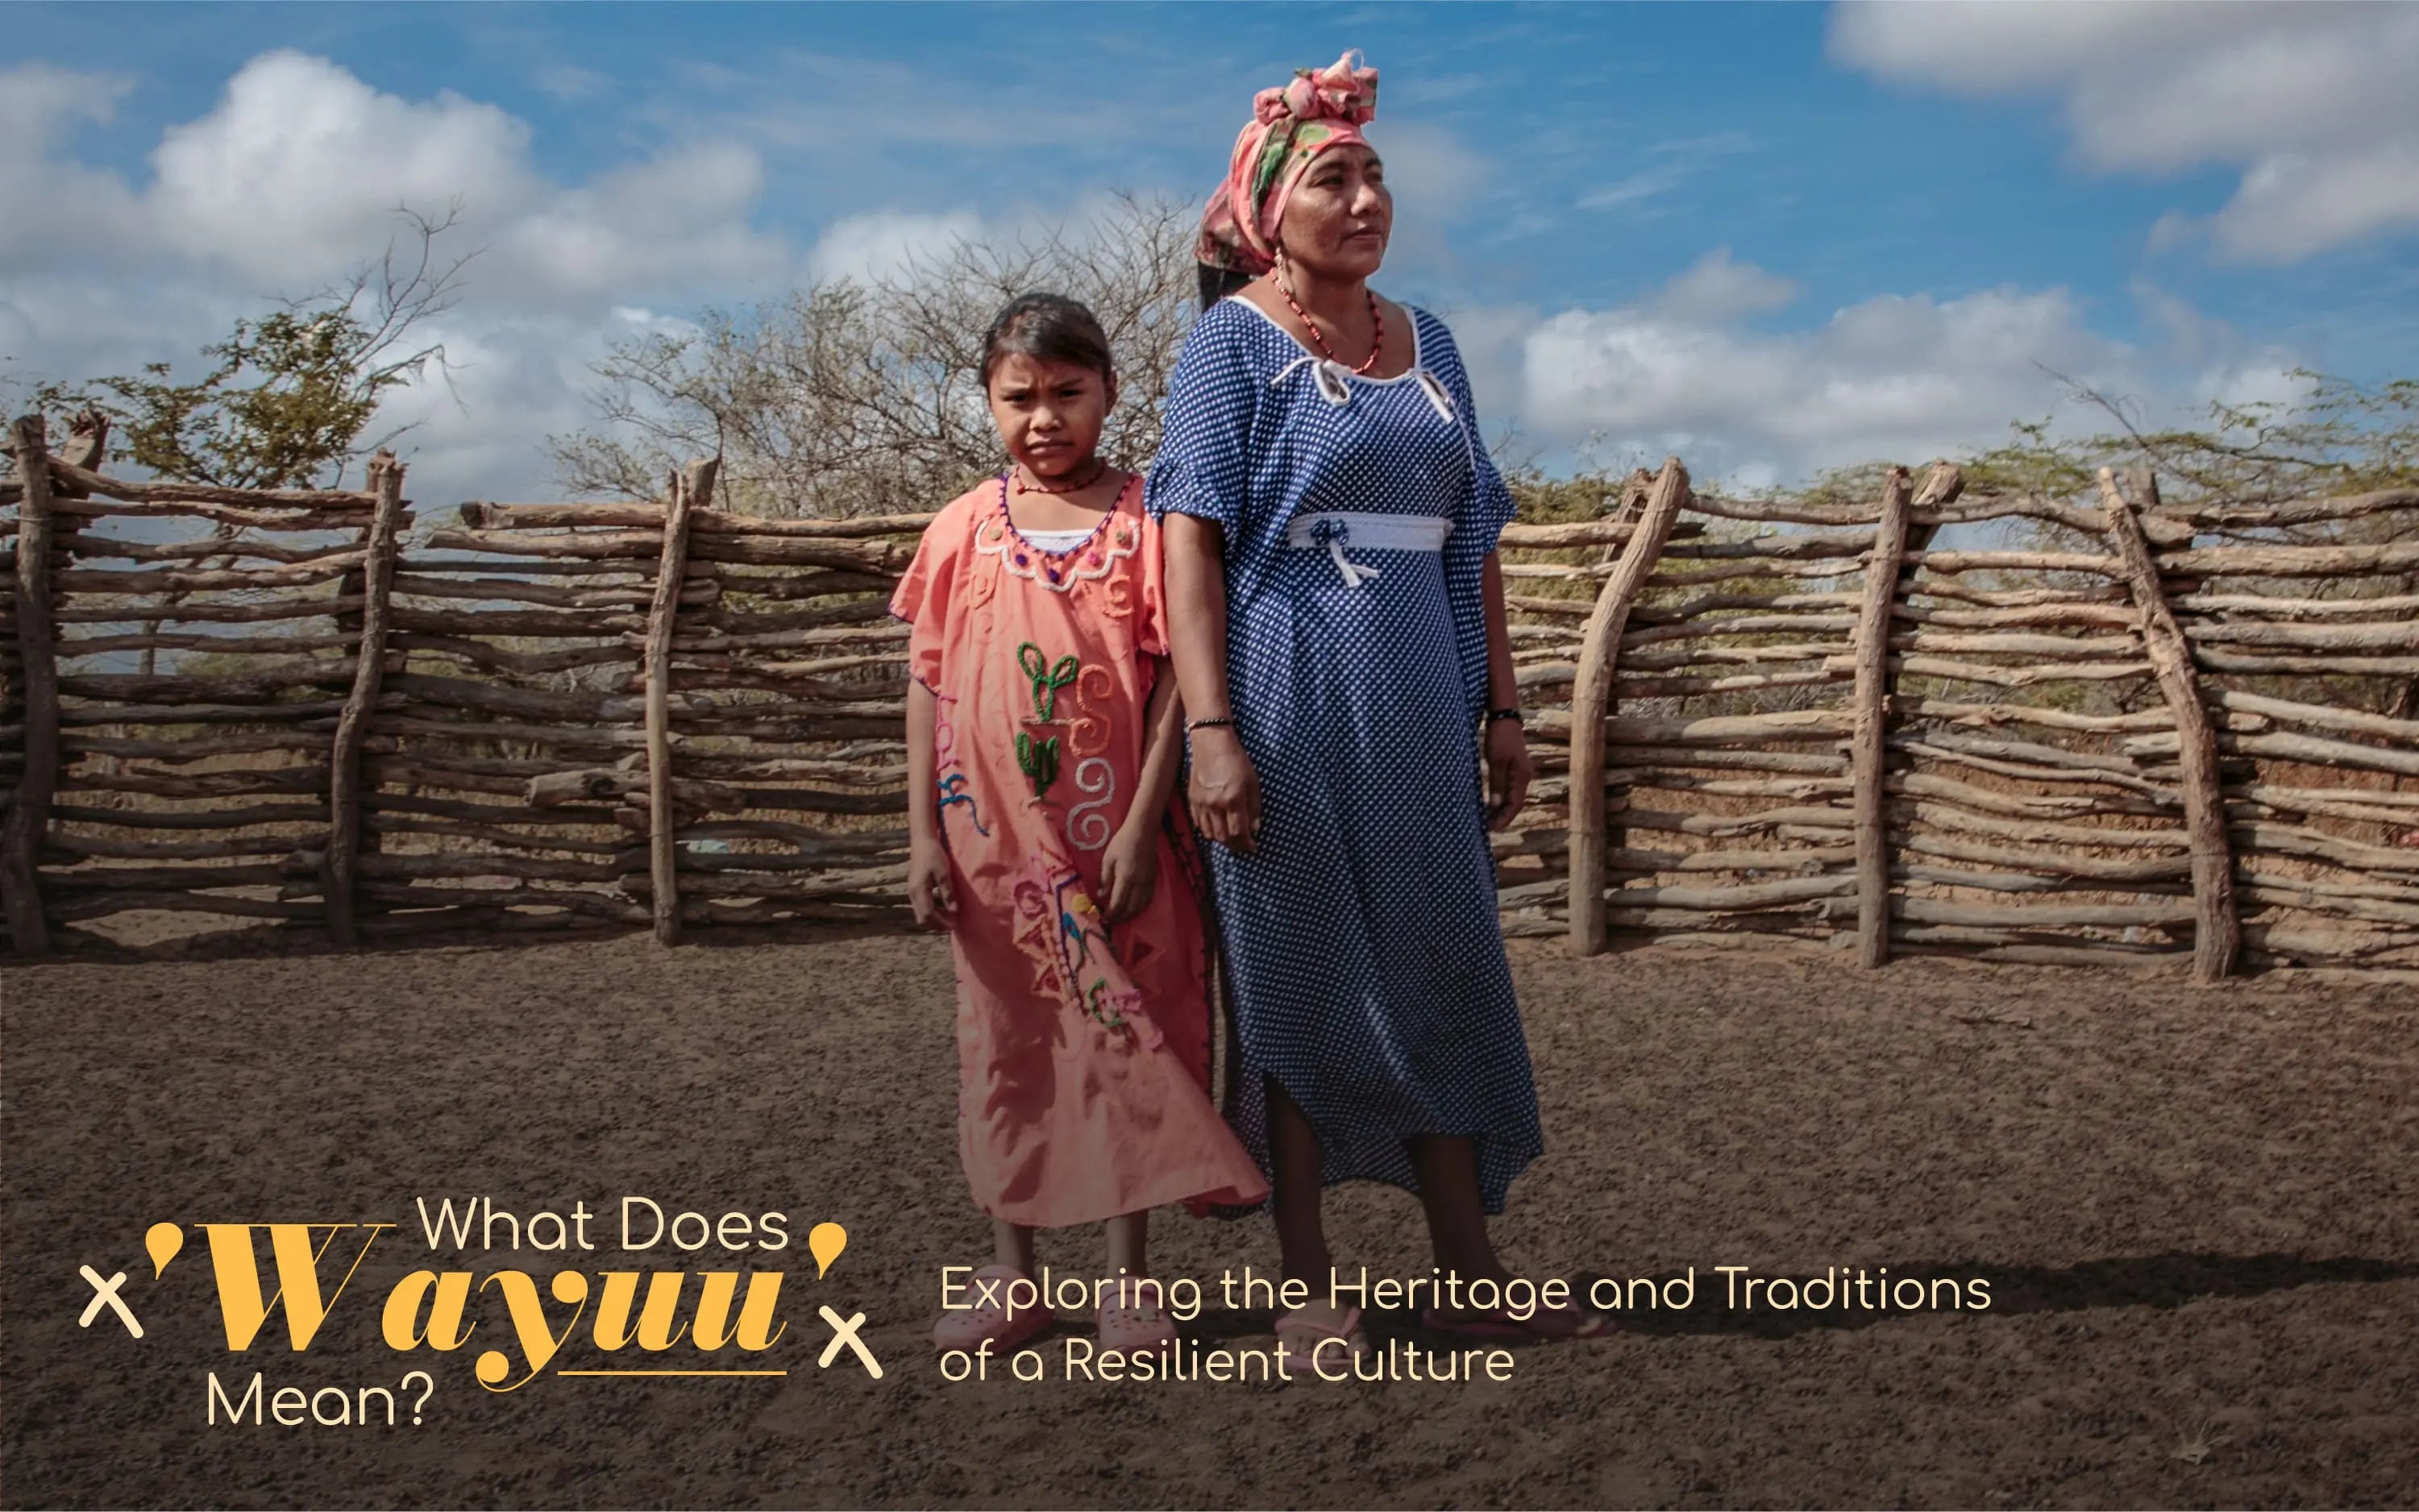 What Does 'Wayuu' Mean? Exploring the Heritage and Traditions of a Resilient Culture